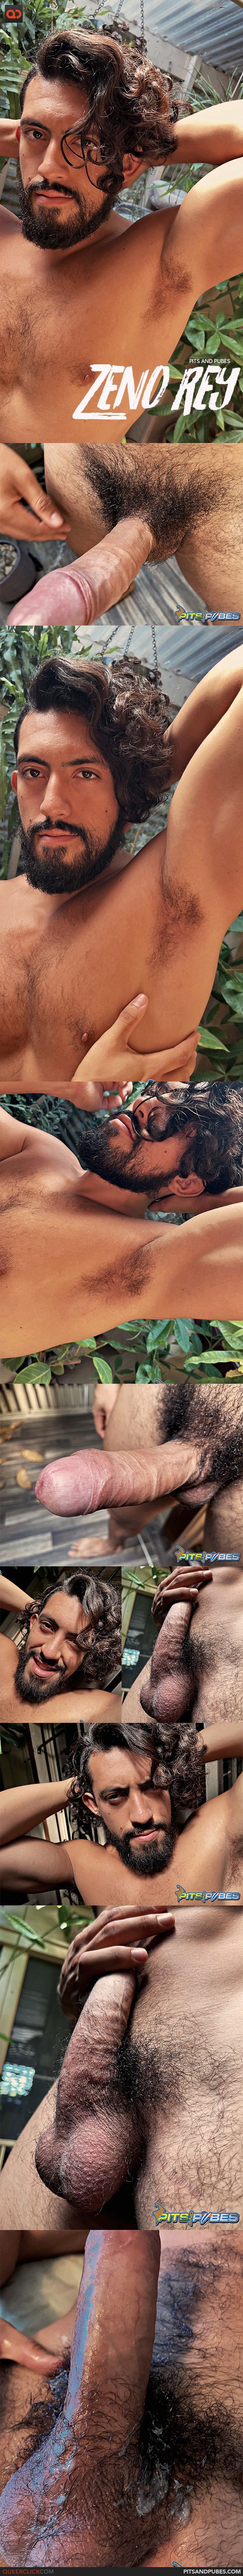 Pits and Pubes: Zeno Rey